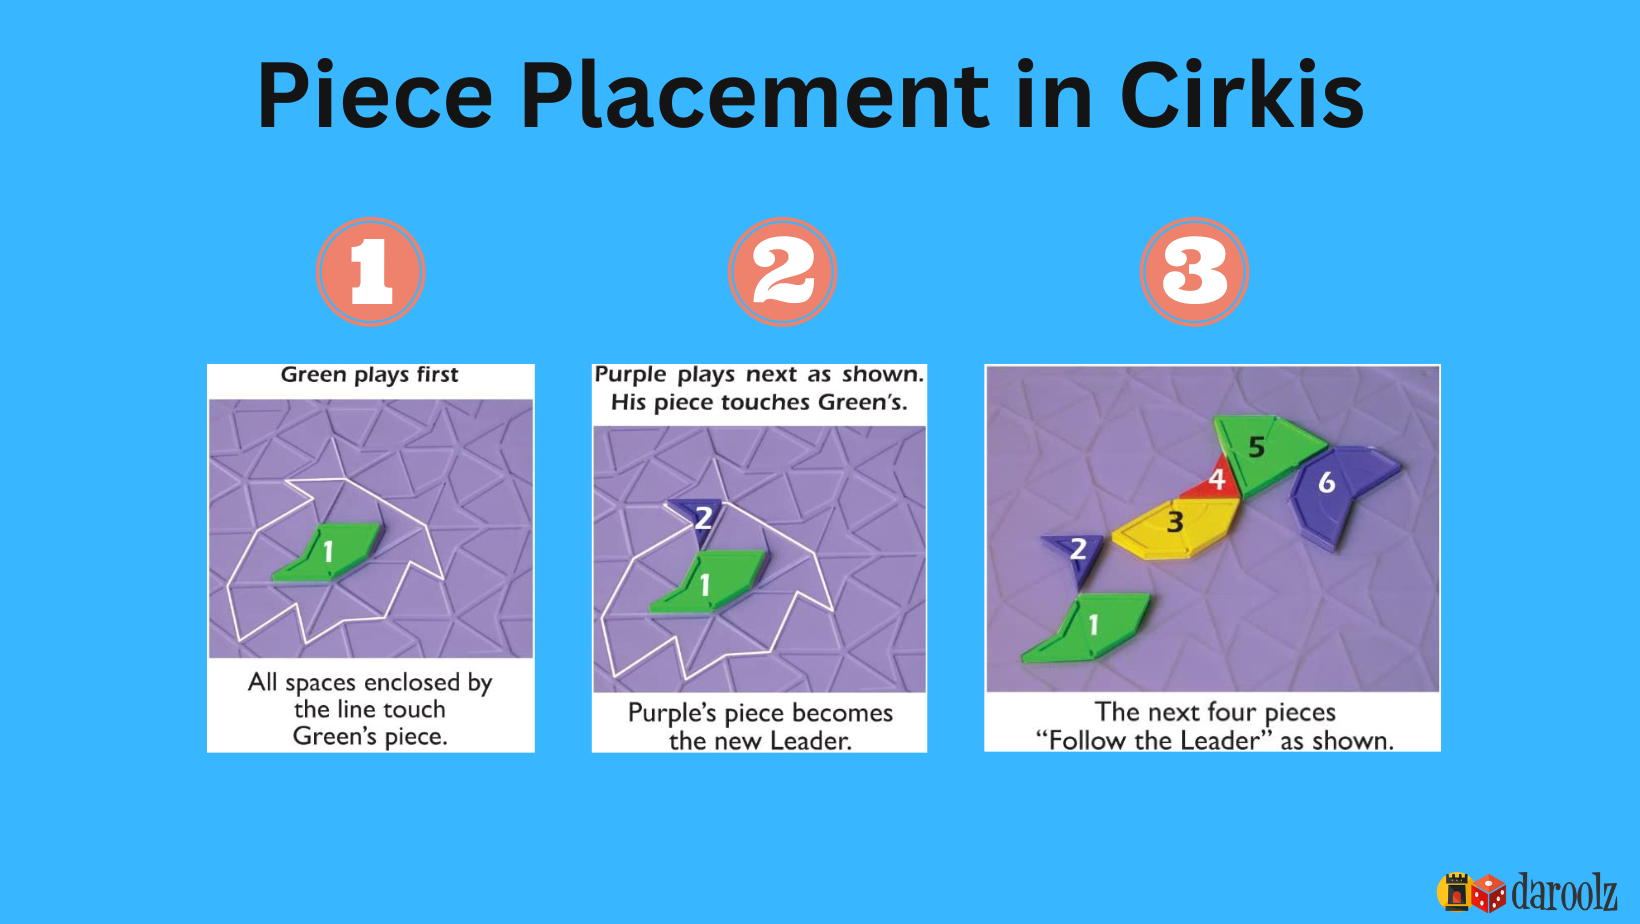 Cirkis Game Rules - Piece Placement